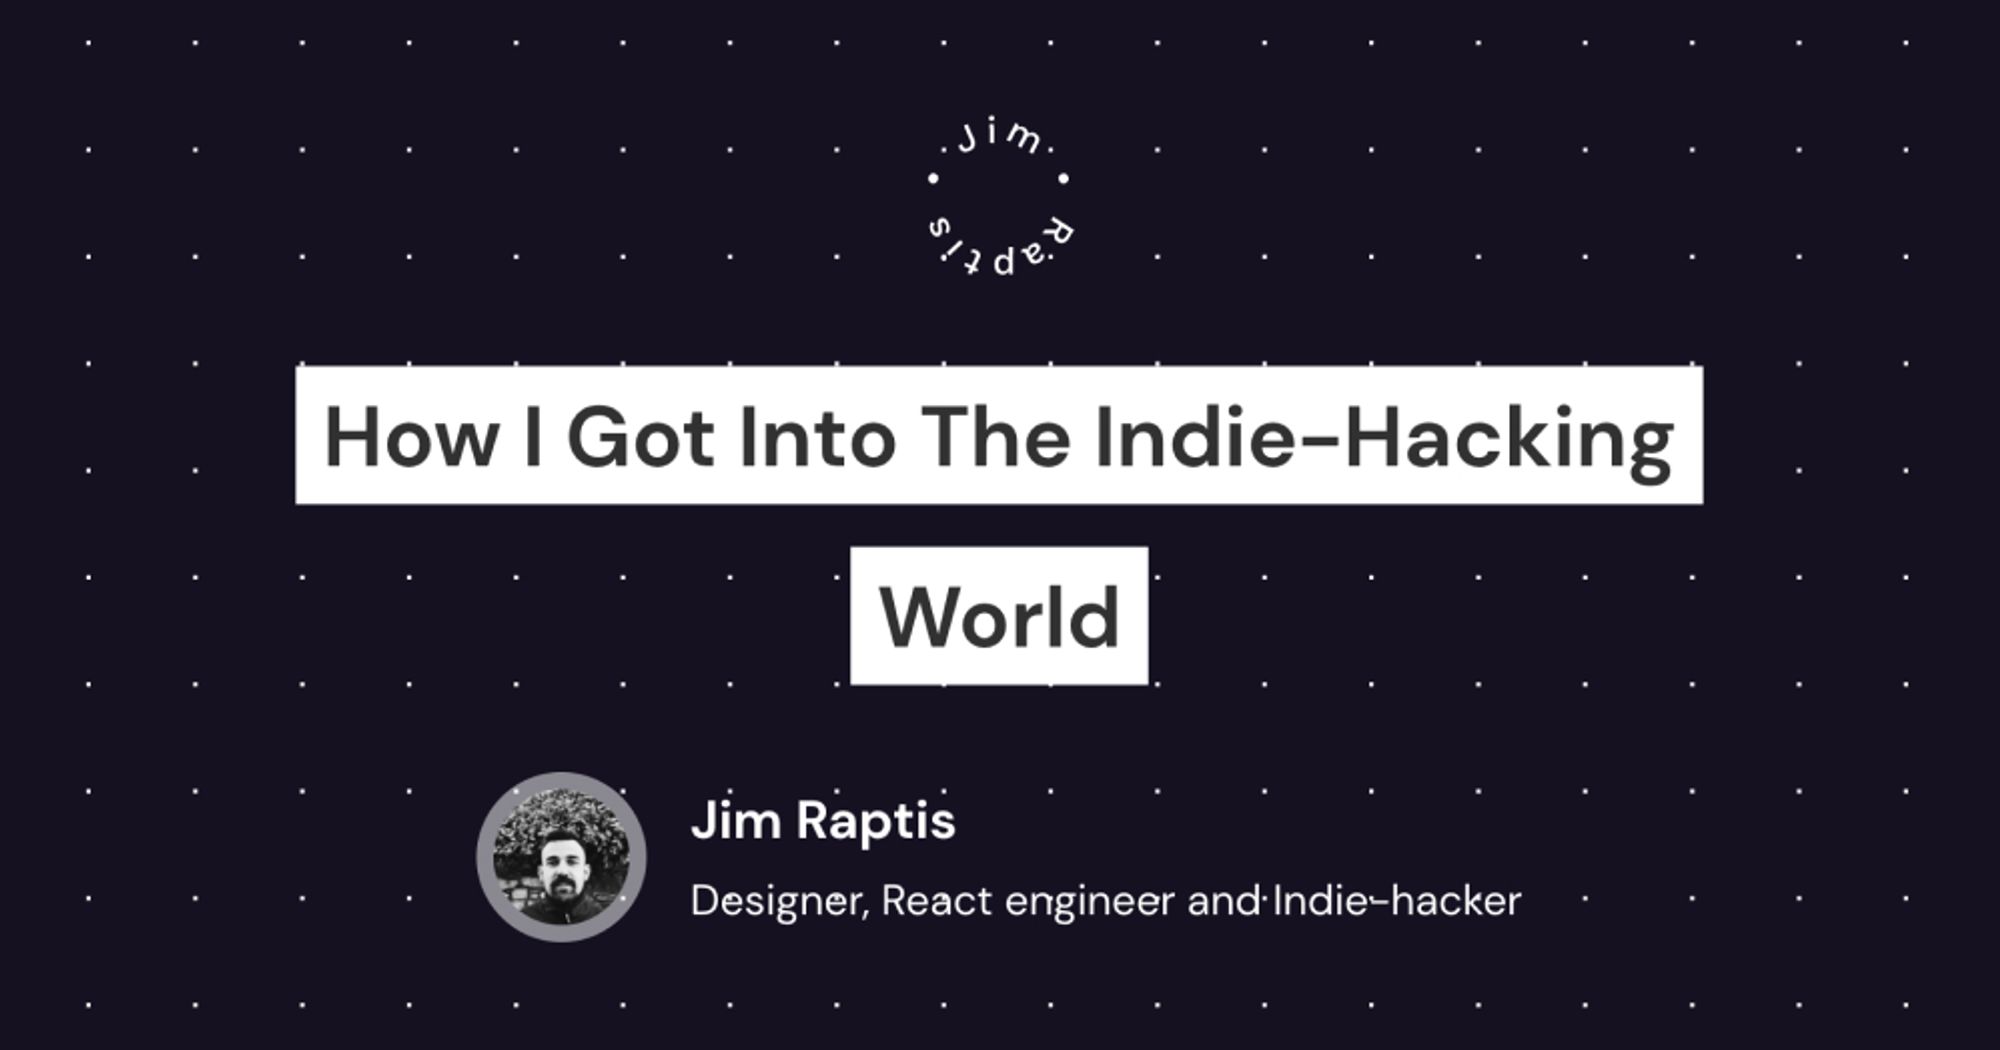 How I started indie-hacking, unexpectedly